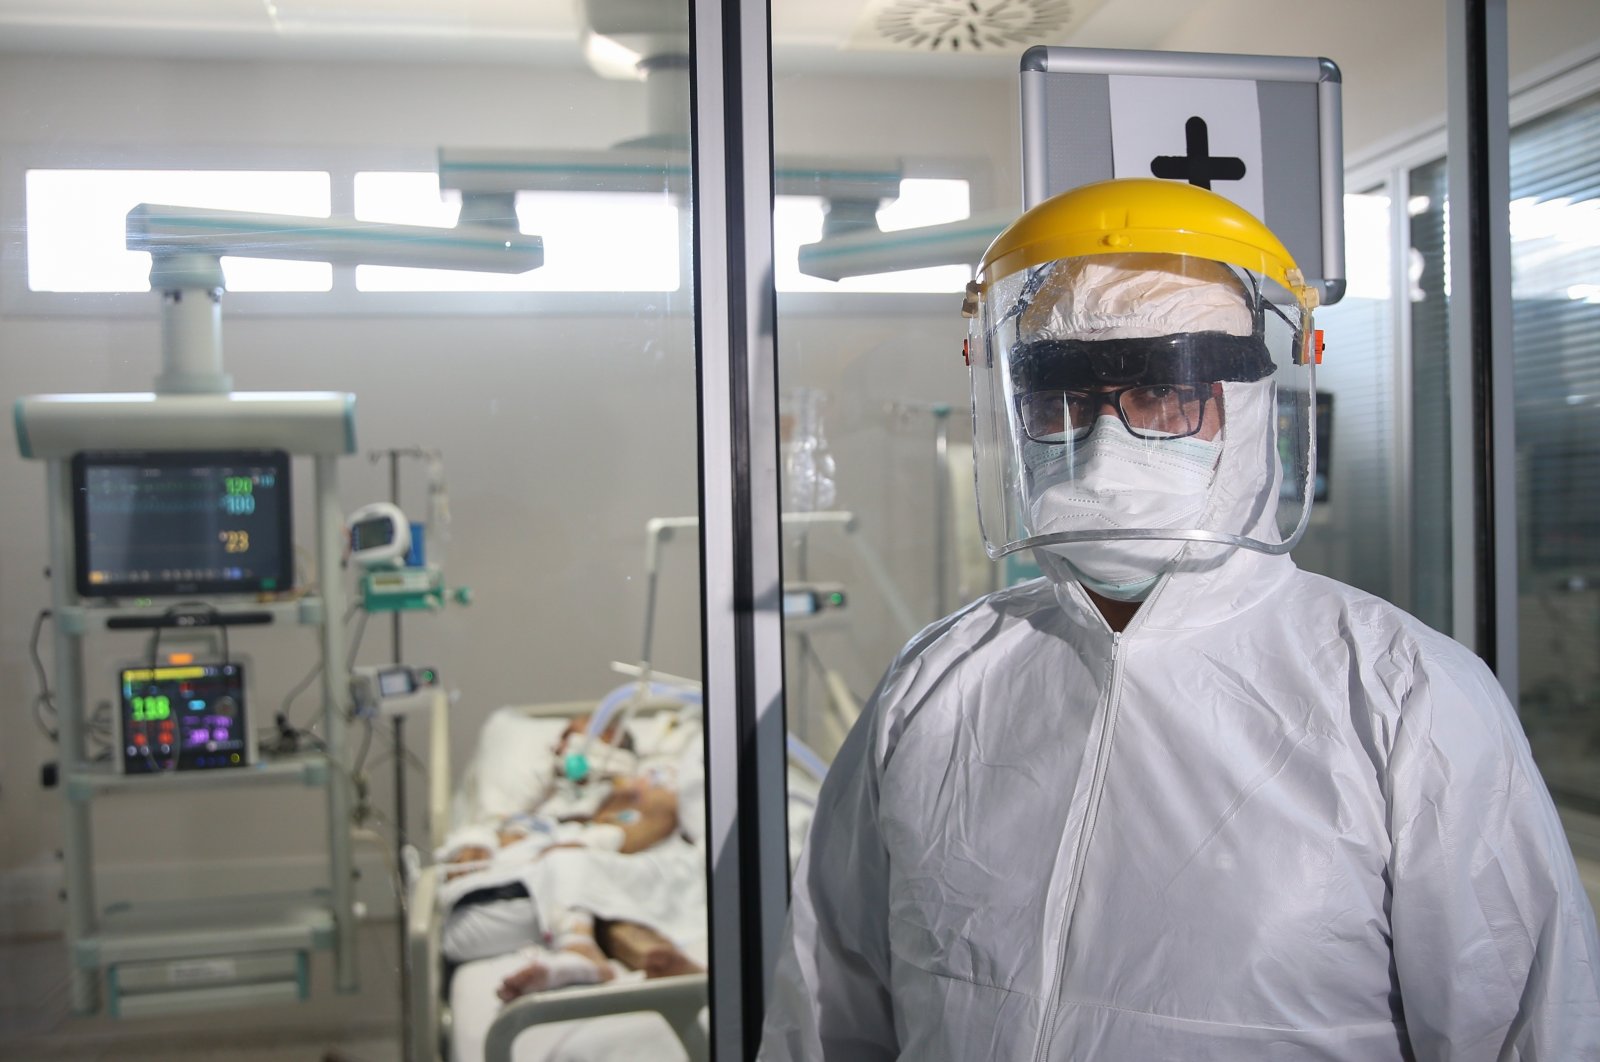 Murat Yılmaz wearing protective gear stands at the entrance to an intensive care unit at the Akdeniz University Hospital in Antalya, southern Turkey, Sept. 15, 2020. (AA Photo)